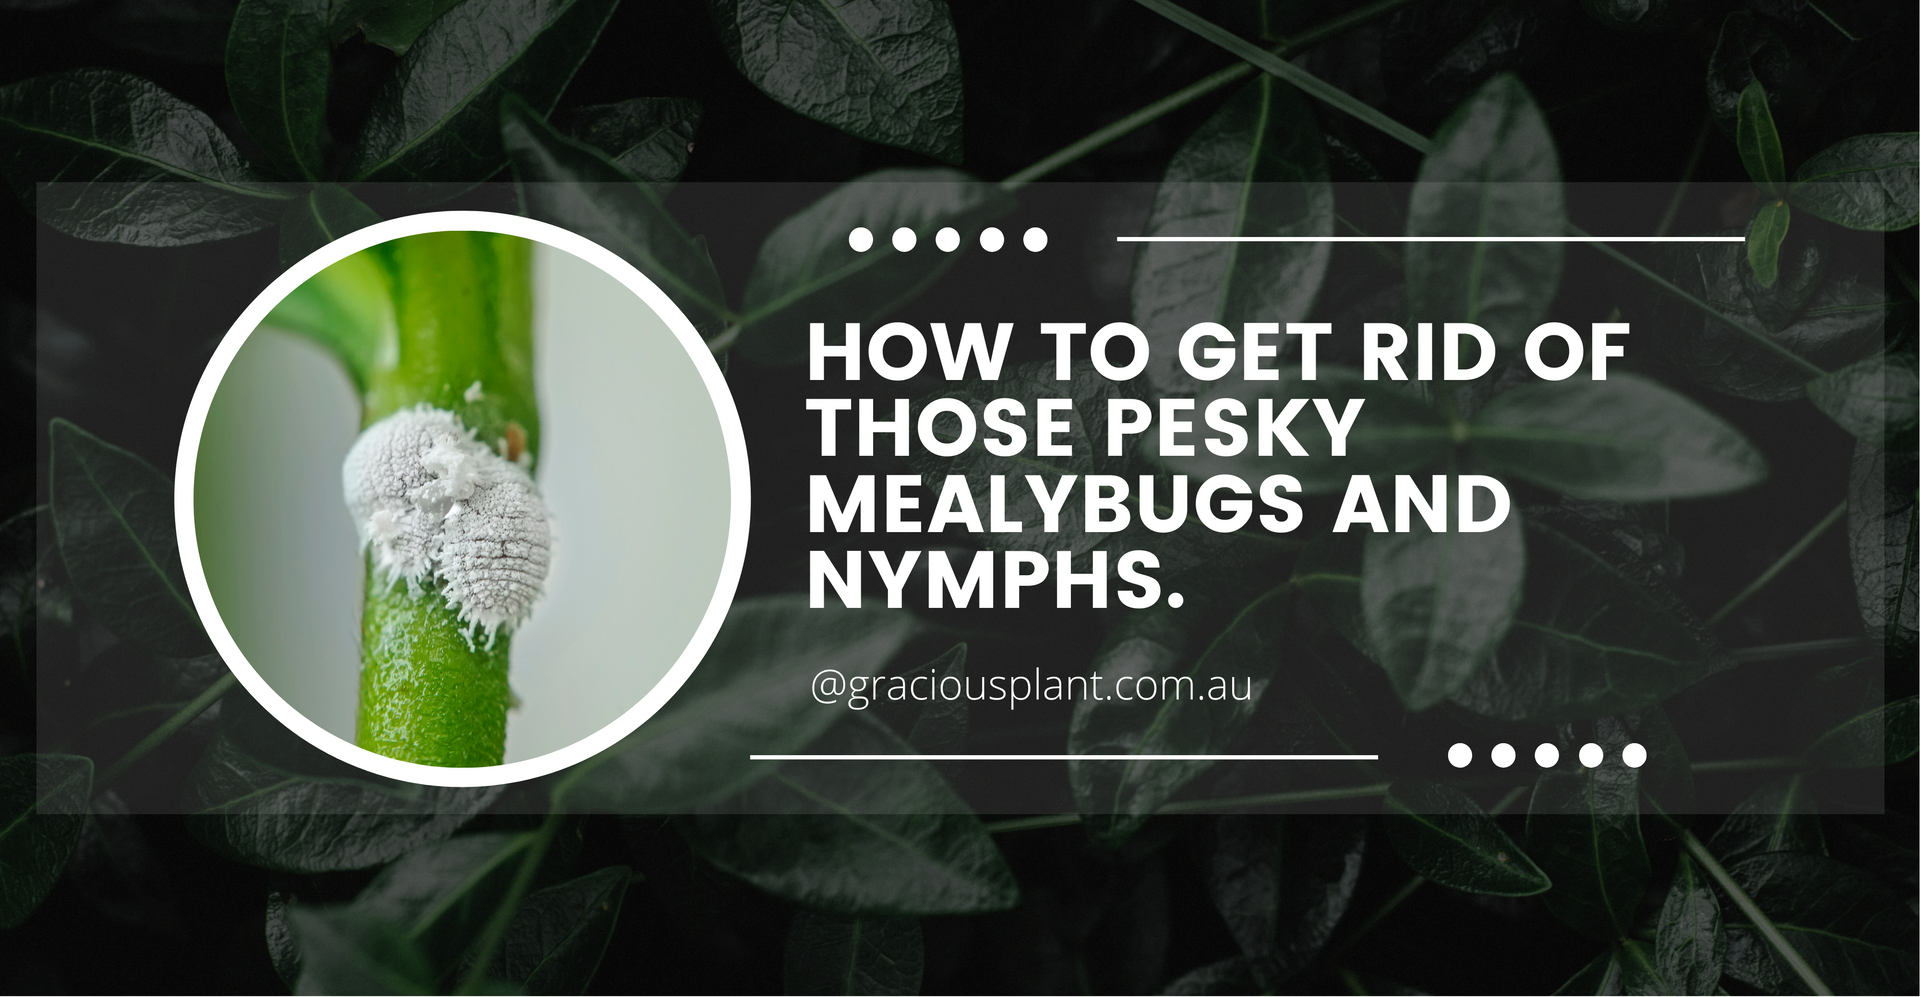 How to get rid of those pesky Mealybugs and Nymphs